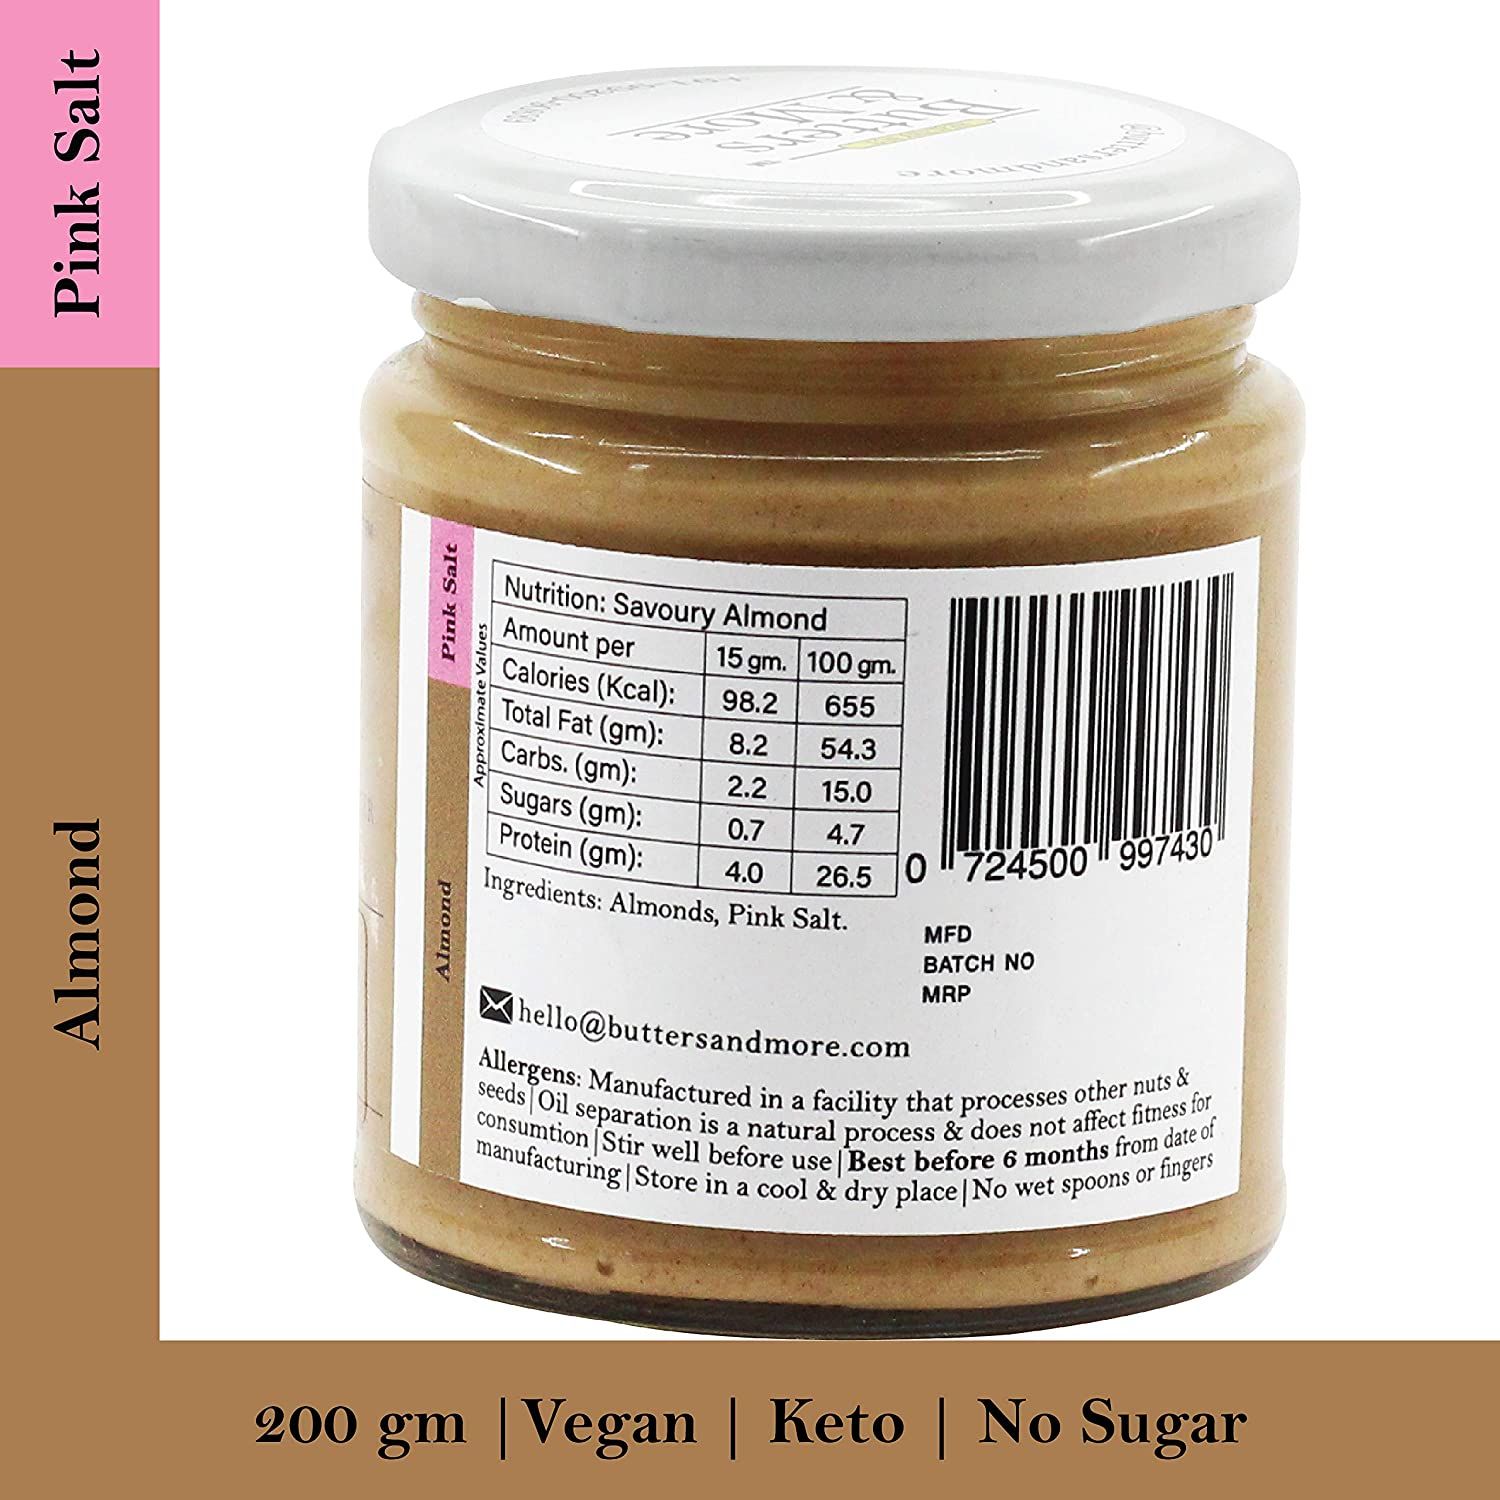 Butters & More Vegan Almond Butter with Pink Salt Image